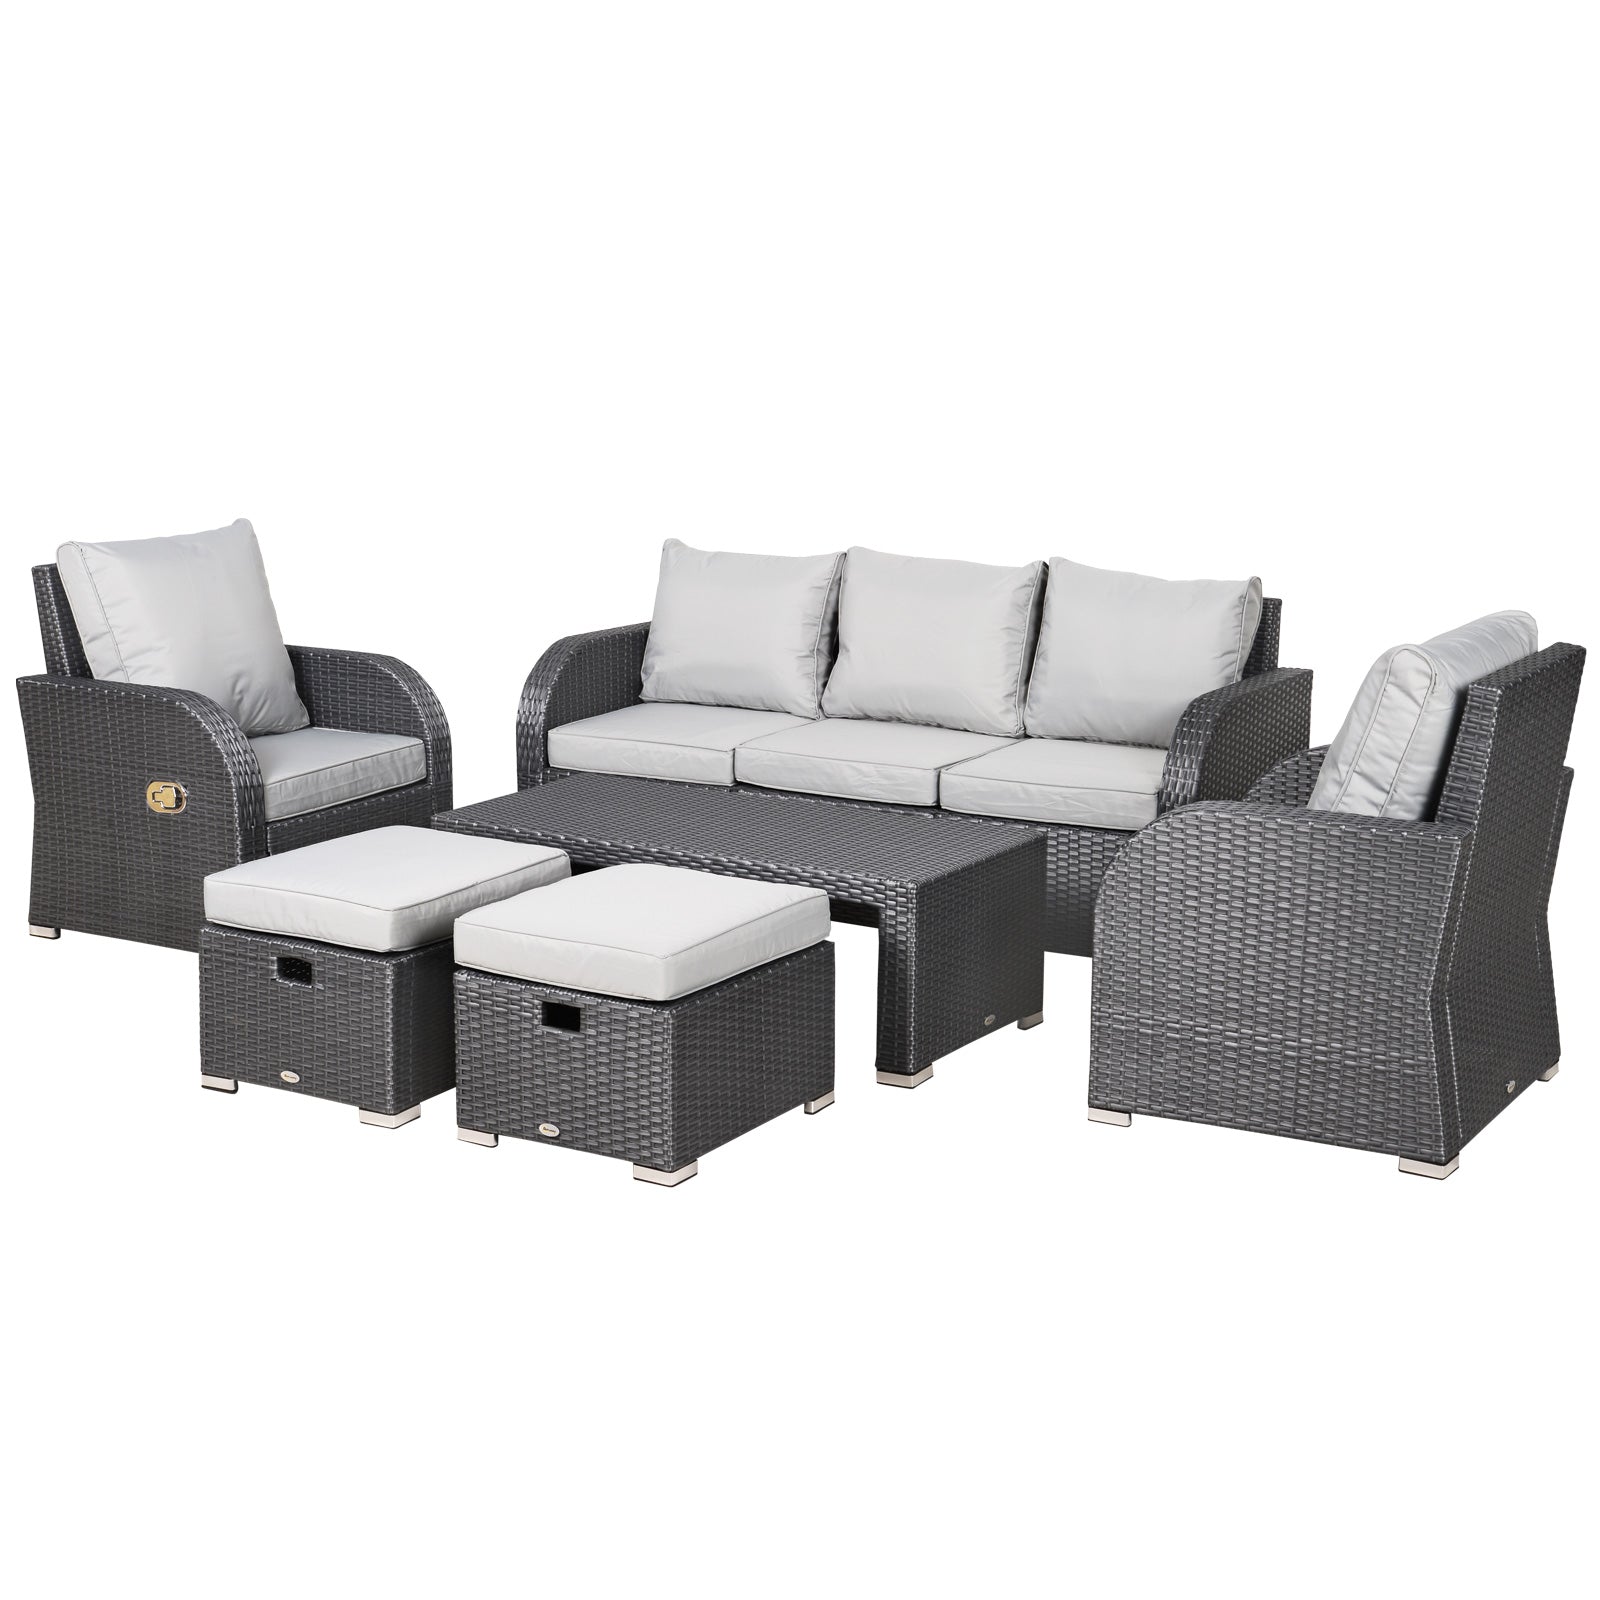 Outsunny 6pc Padded Outdoor Rattan Wicker 3-Seat Sofa Recliner Footstool Table  | TJ Hughes